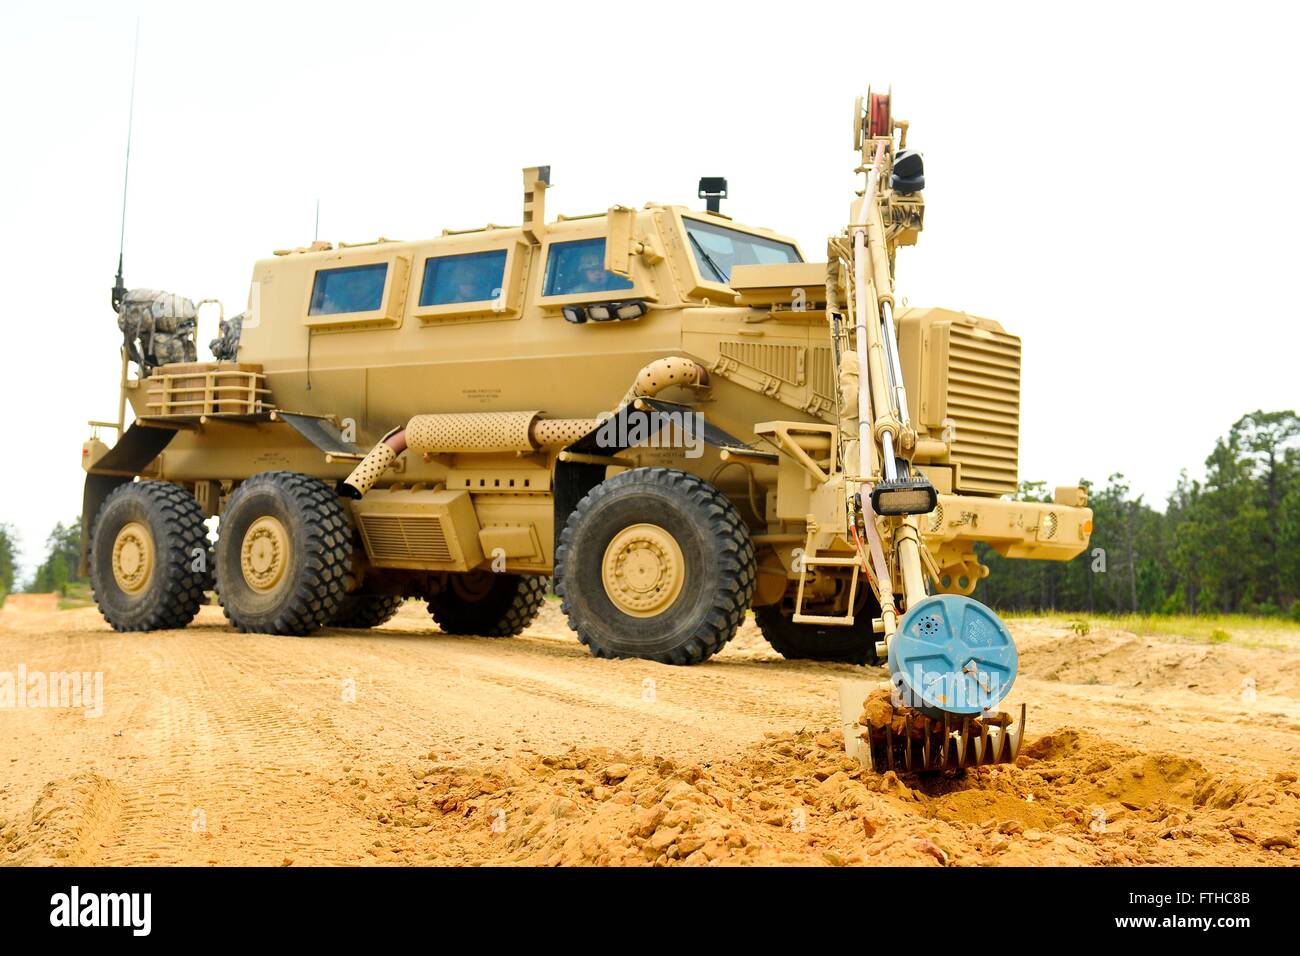 A U.S. Army Buffalo explosive device detection vehicle digs up an improvised explosive device using the robotic arm during route clearance operations training at McCrady Training Center June 24, 2014 in Eastover, South Carolina. Stock Photo